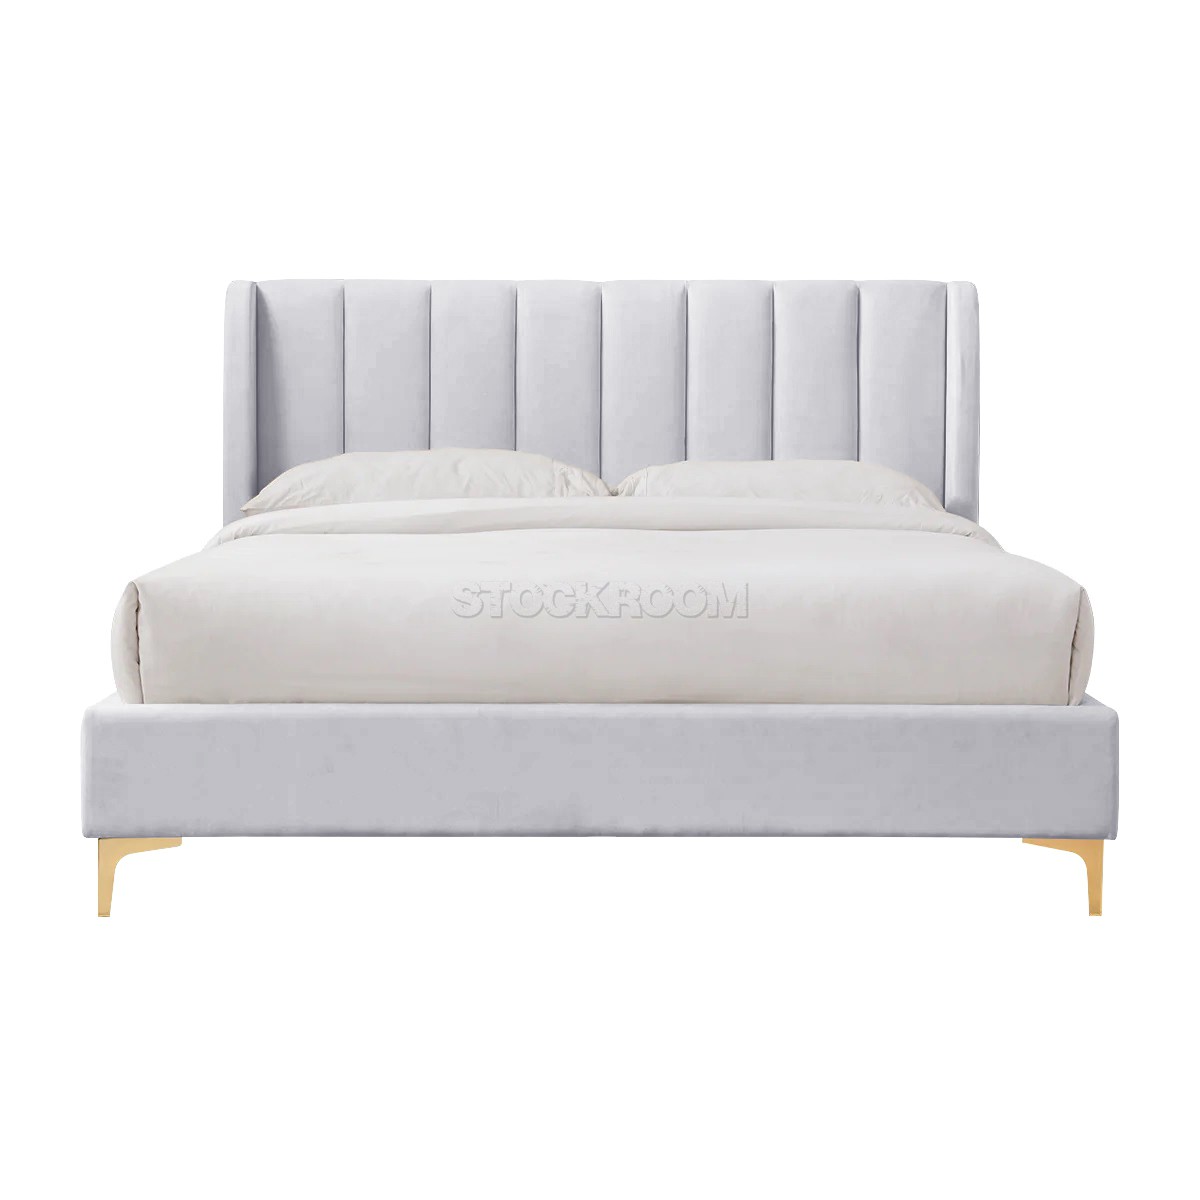 Athen Fabric Upholstered Bed Frame With Different Color Options